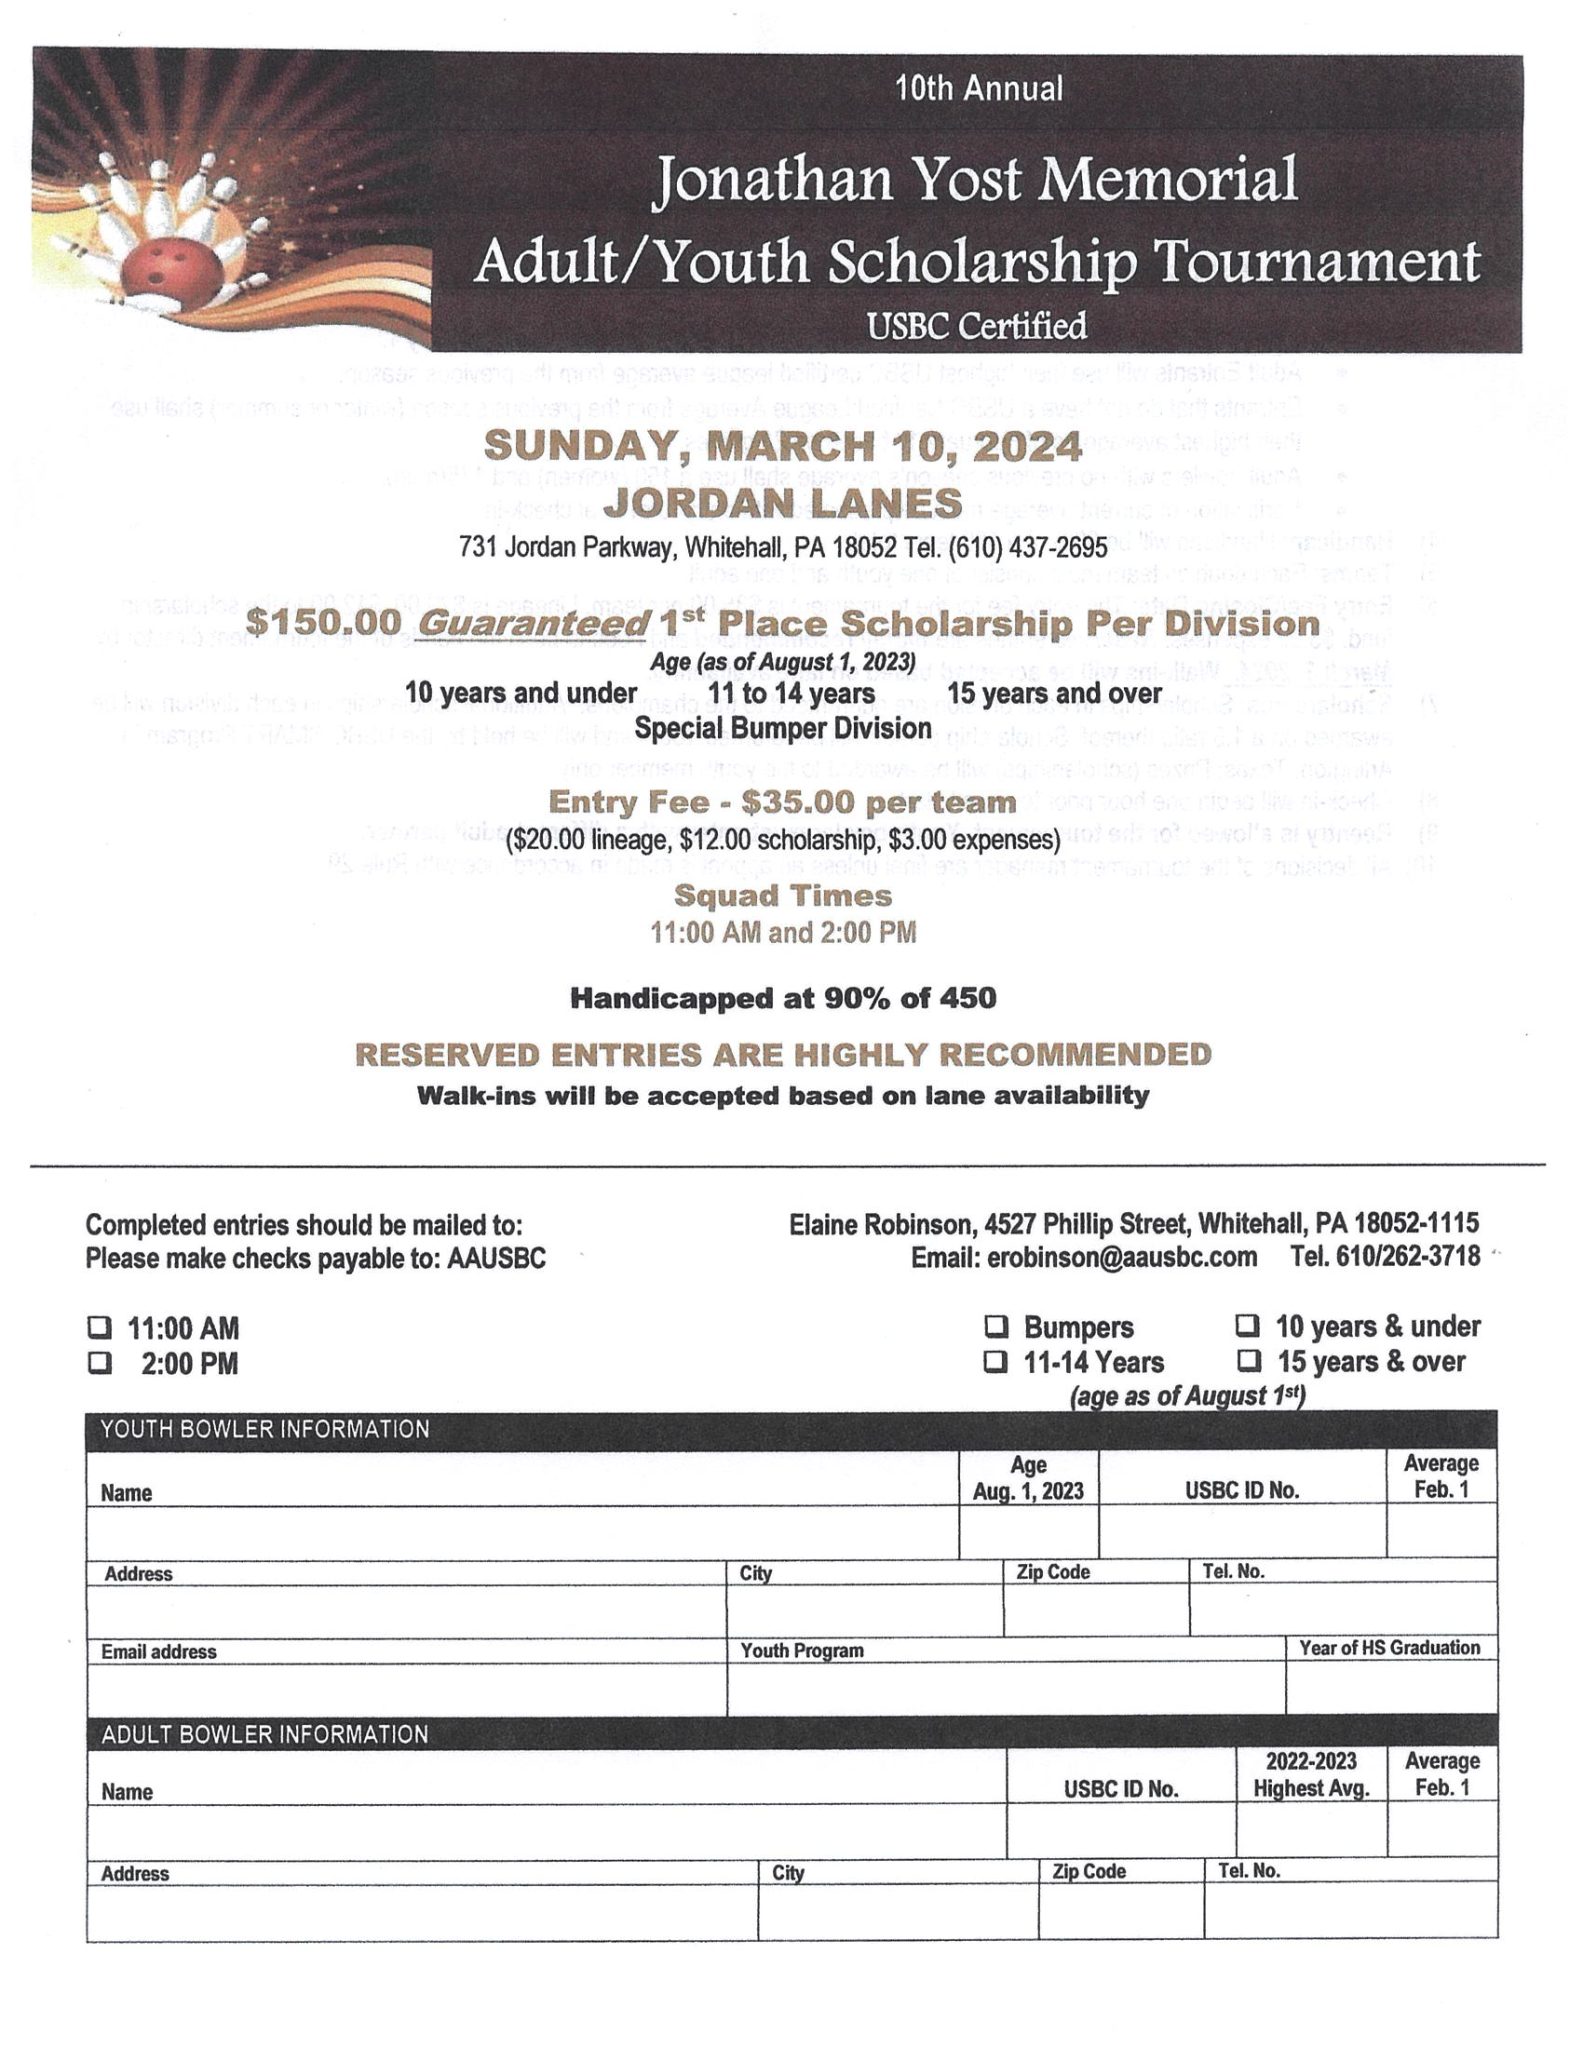 10th Annual Jonathan Yost Memorial Adult / Youth Scholarship Tournament 23